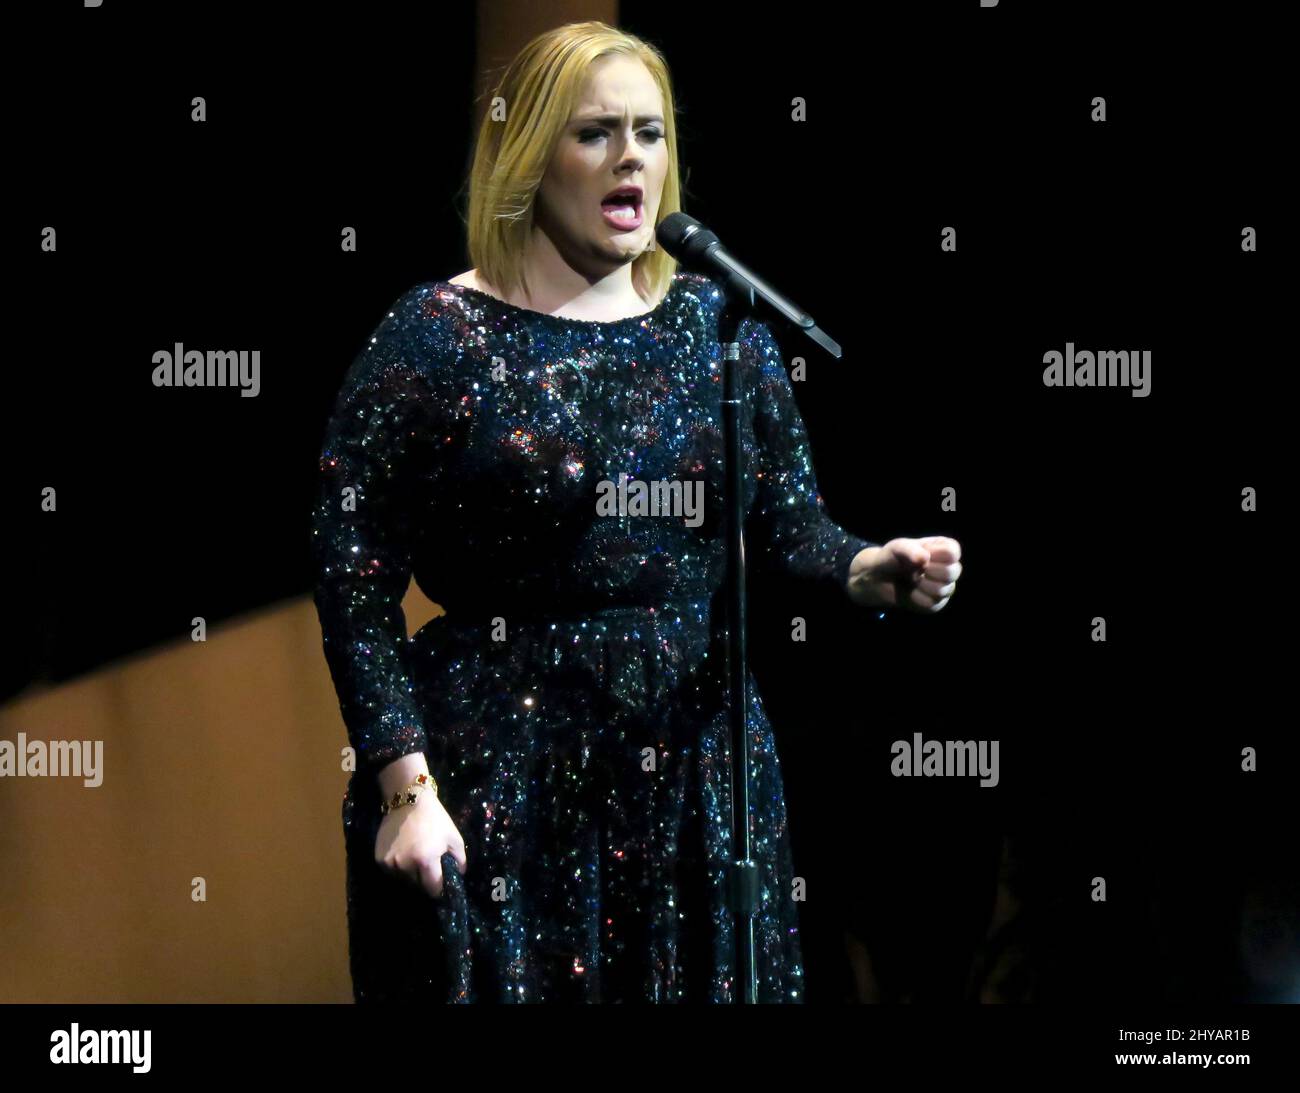 Adele peforms live in concert for her second night at the Bridgestone Arena in Nashville, USA. Stock Photo